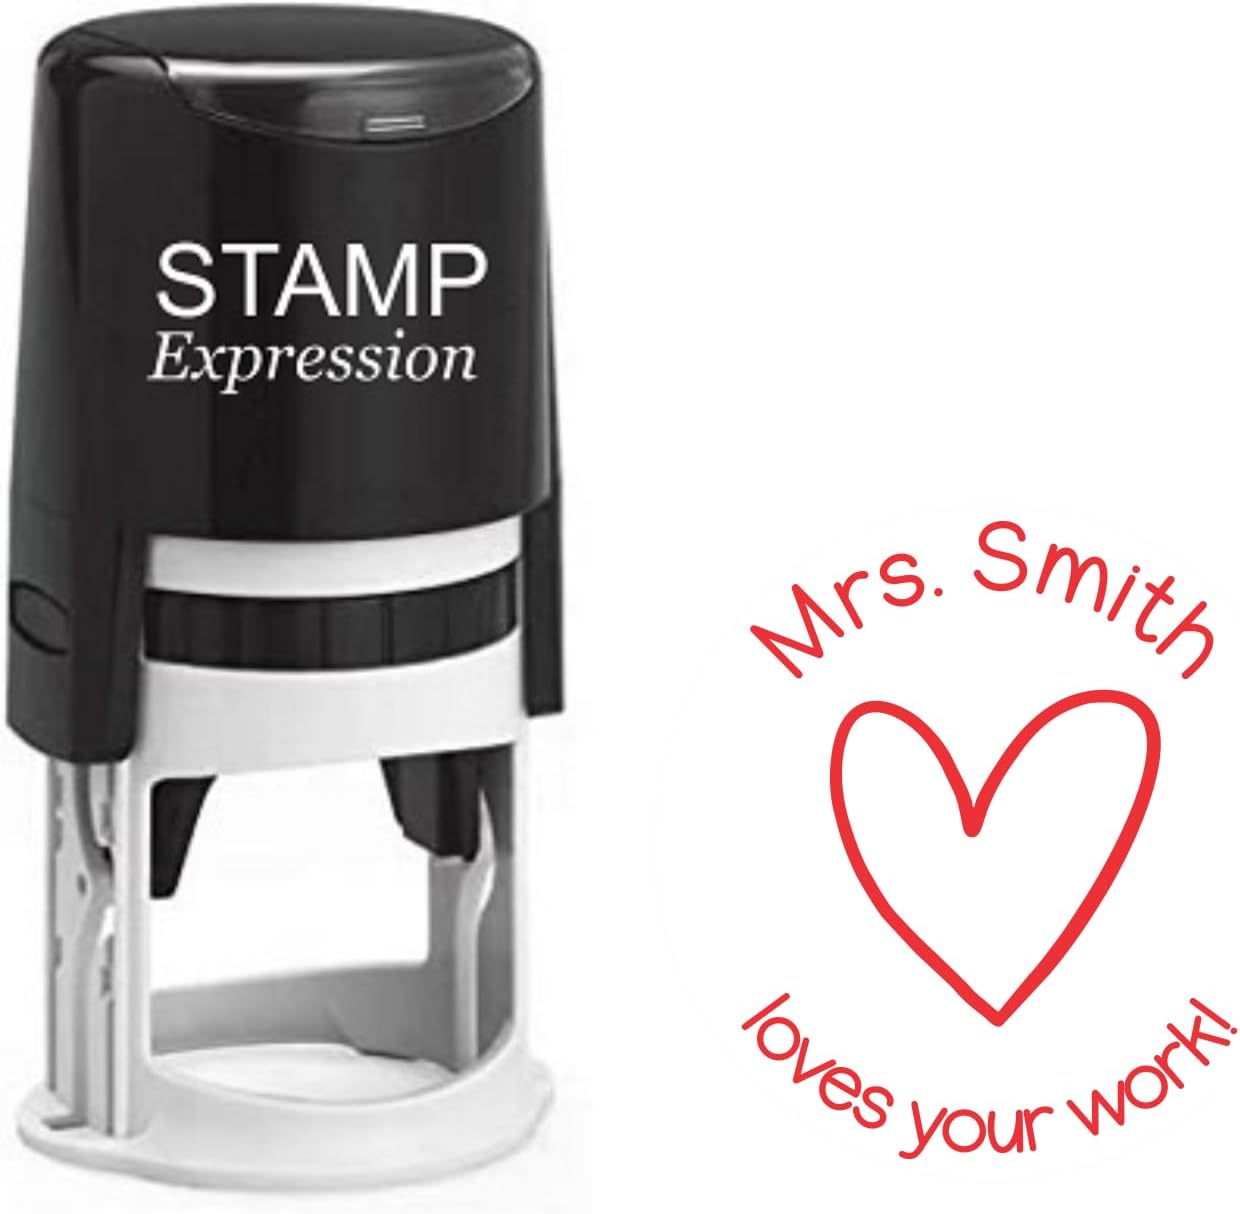 Loves Your Work Teacher Custom Stamp - Self Inking. Personalized Rubber Stamp with Lines of Text (SH-76205)